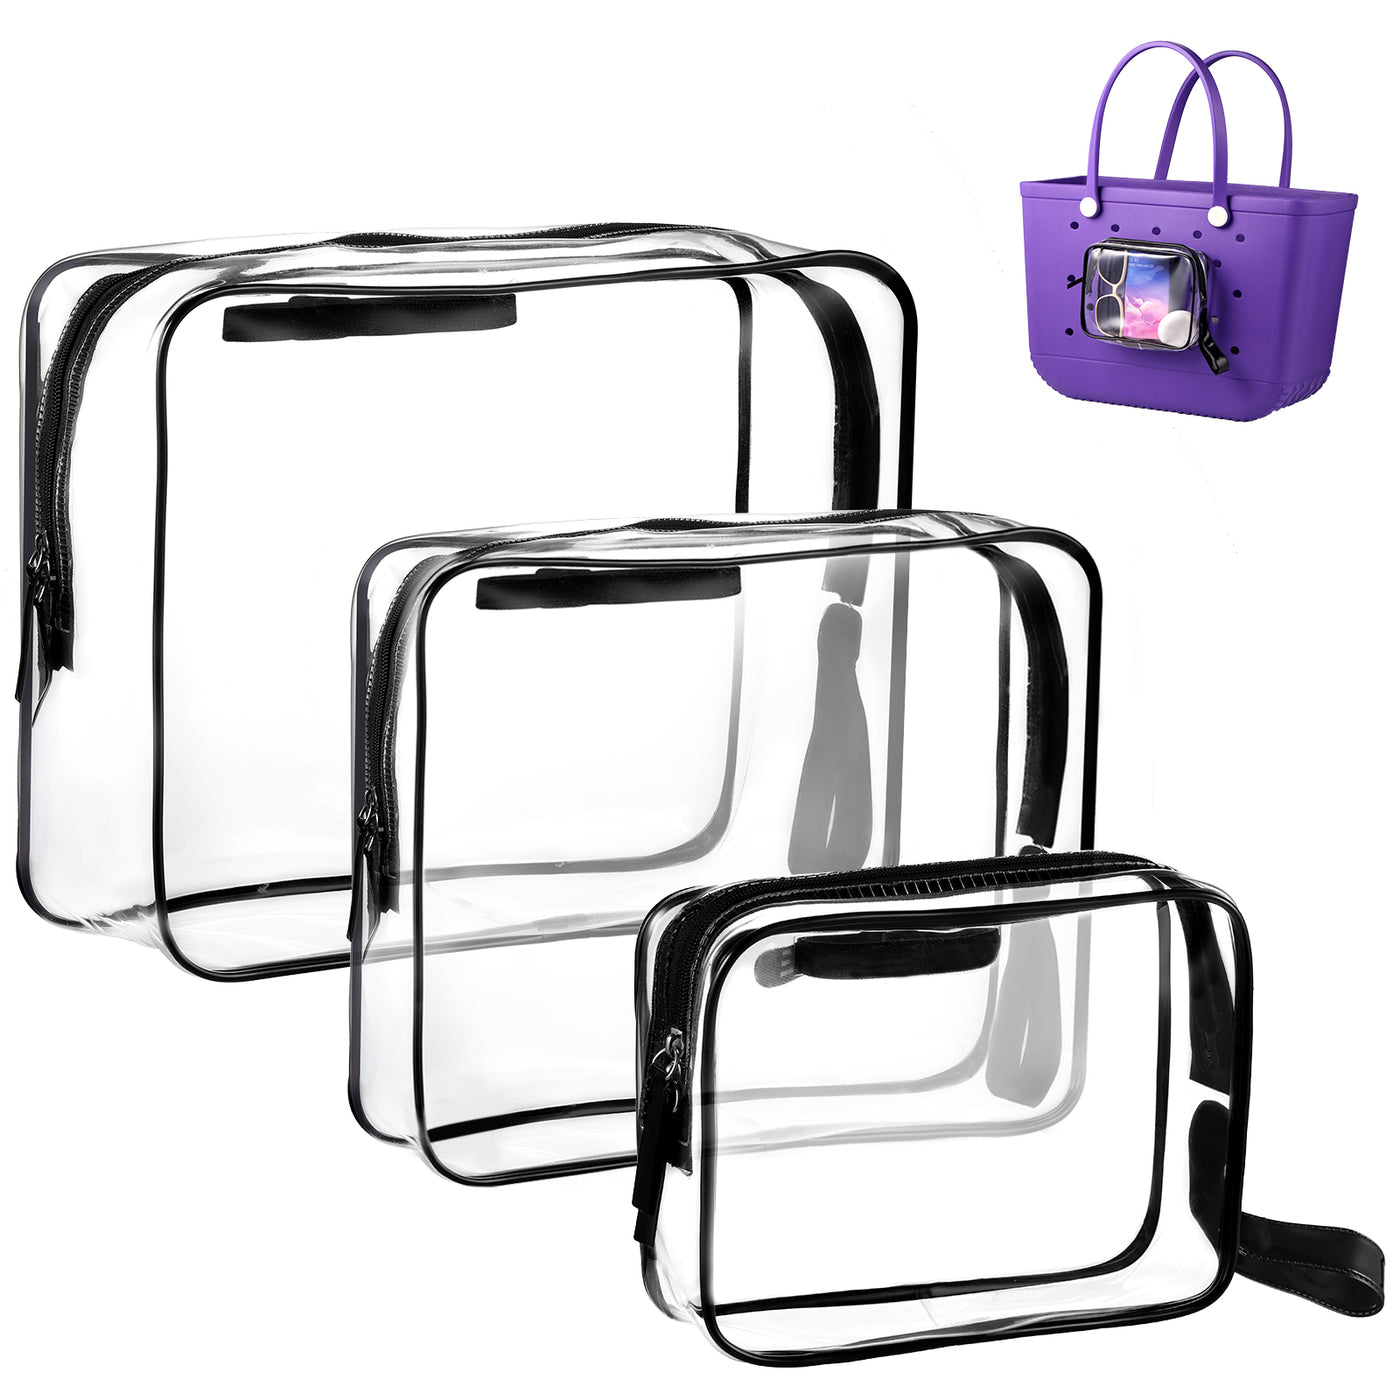 OUTXE 3 Pack Clear Insert Bag for Bogg Bag Accessories, Zipper Insert Pouch for Bogg Bag, Waterproof Clear Inner Bags Compatible with Bogg Bag, Clear Divider Organizer Inserts Bag for Beach Tote Bag